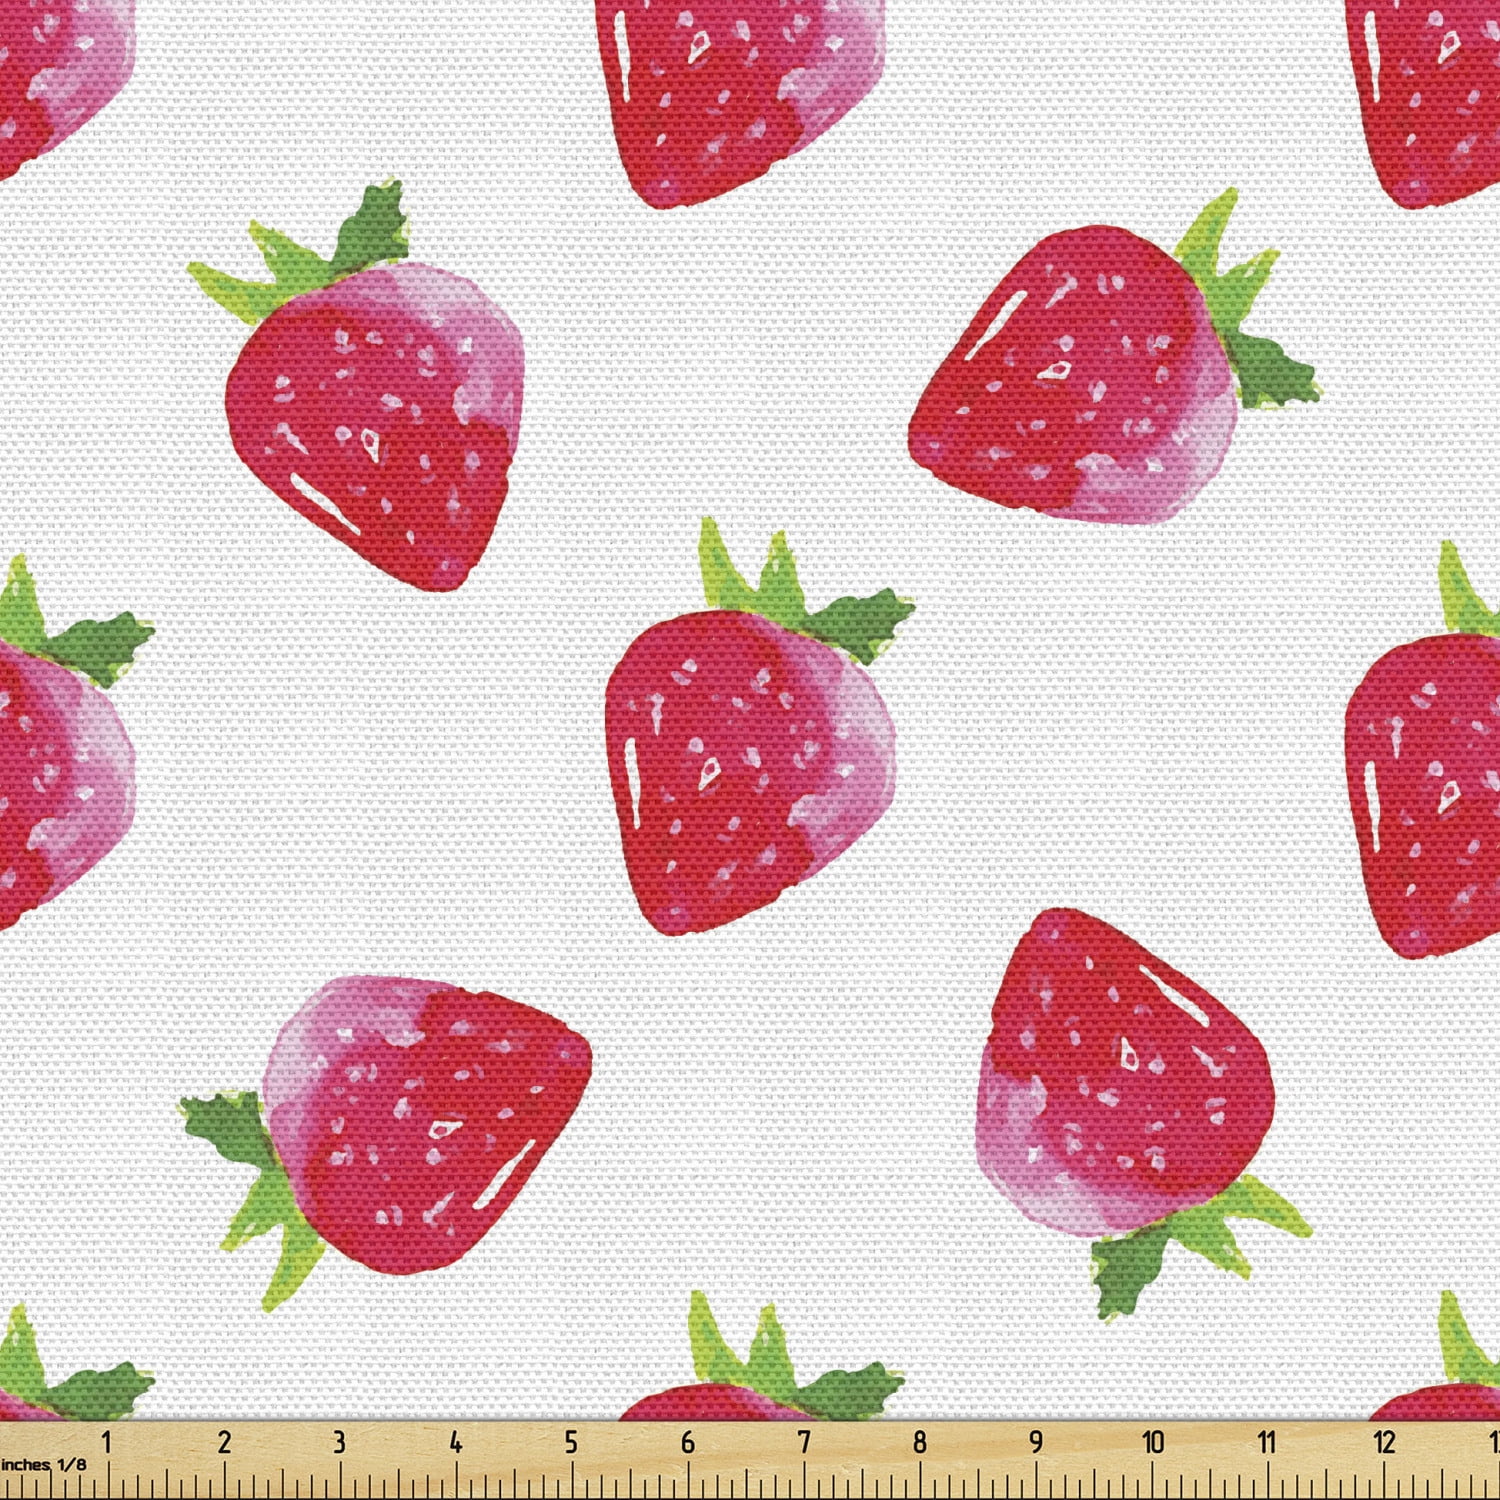 Strawberry Fabric by the Yard, Hand-Painted Juicy Tasty Fruits Organic  Harvest Fresh Organic Food, Decorative Upholstery Fabric for Sofas and Home